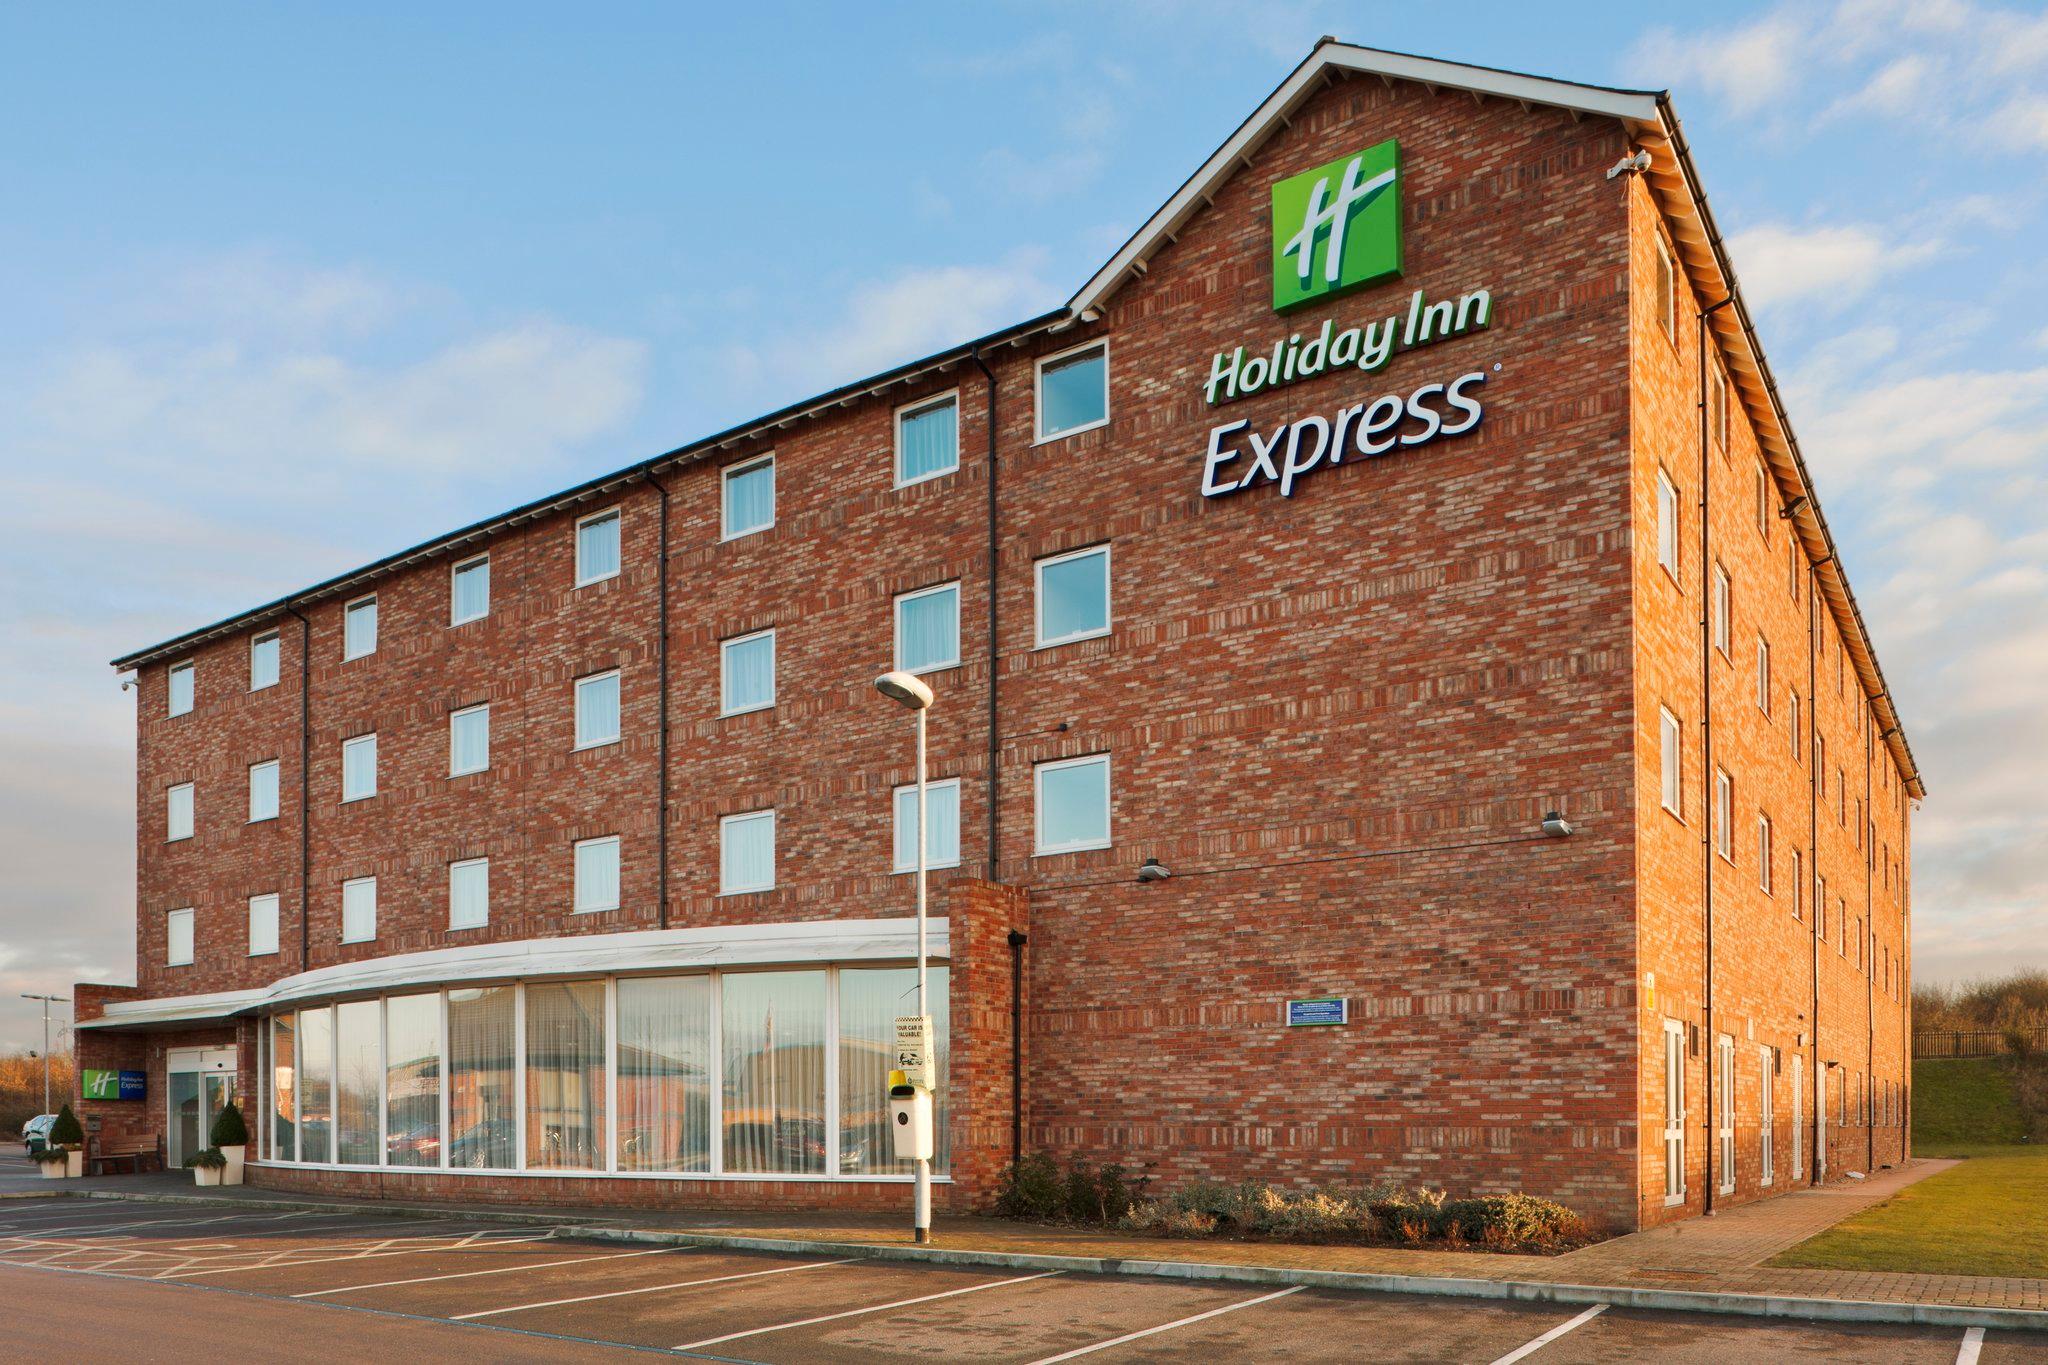 Holiday Inn Express Nuneaton in Coventry, GB1